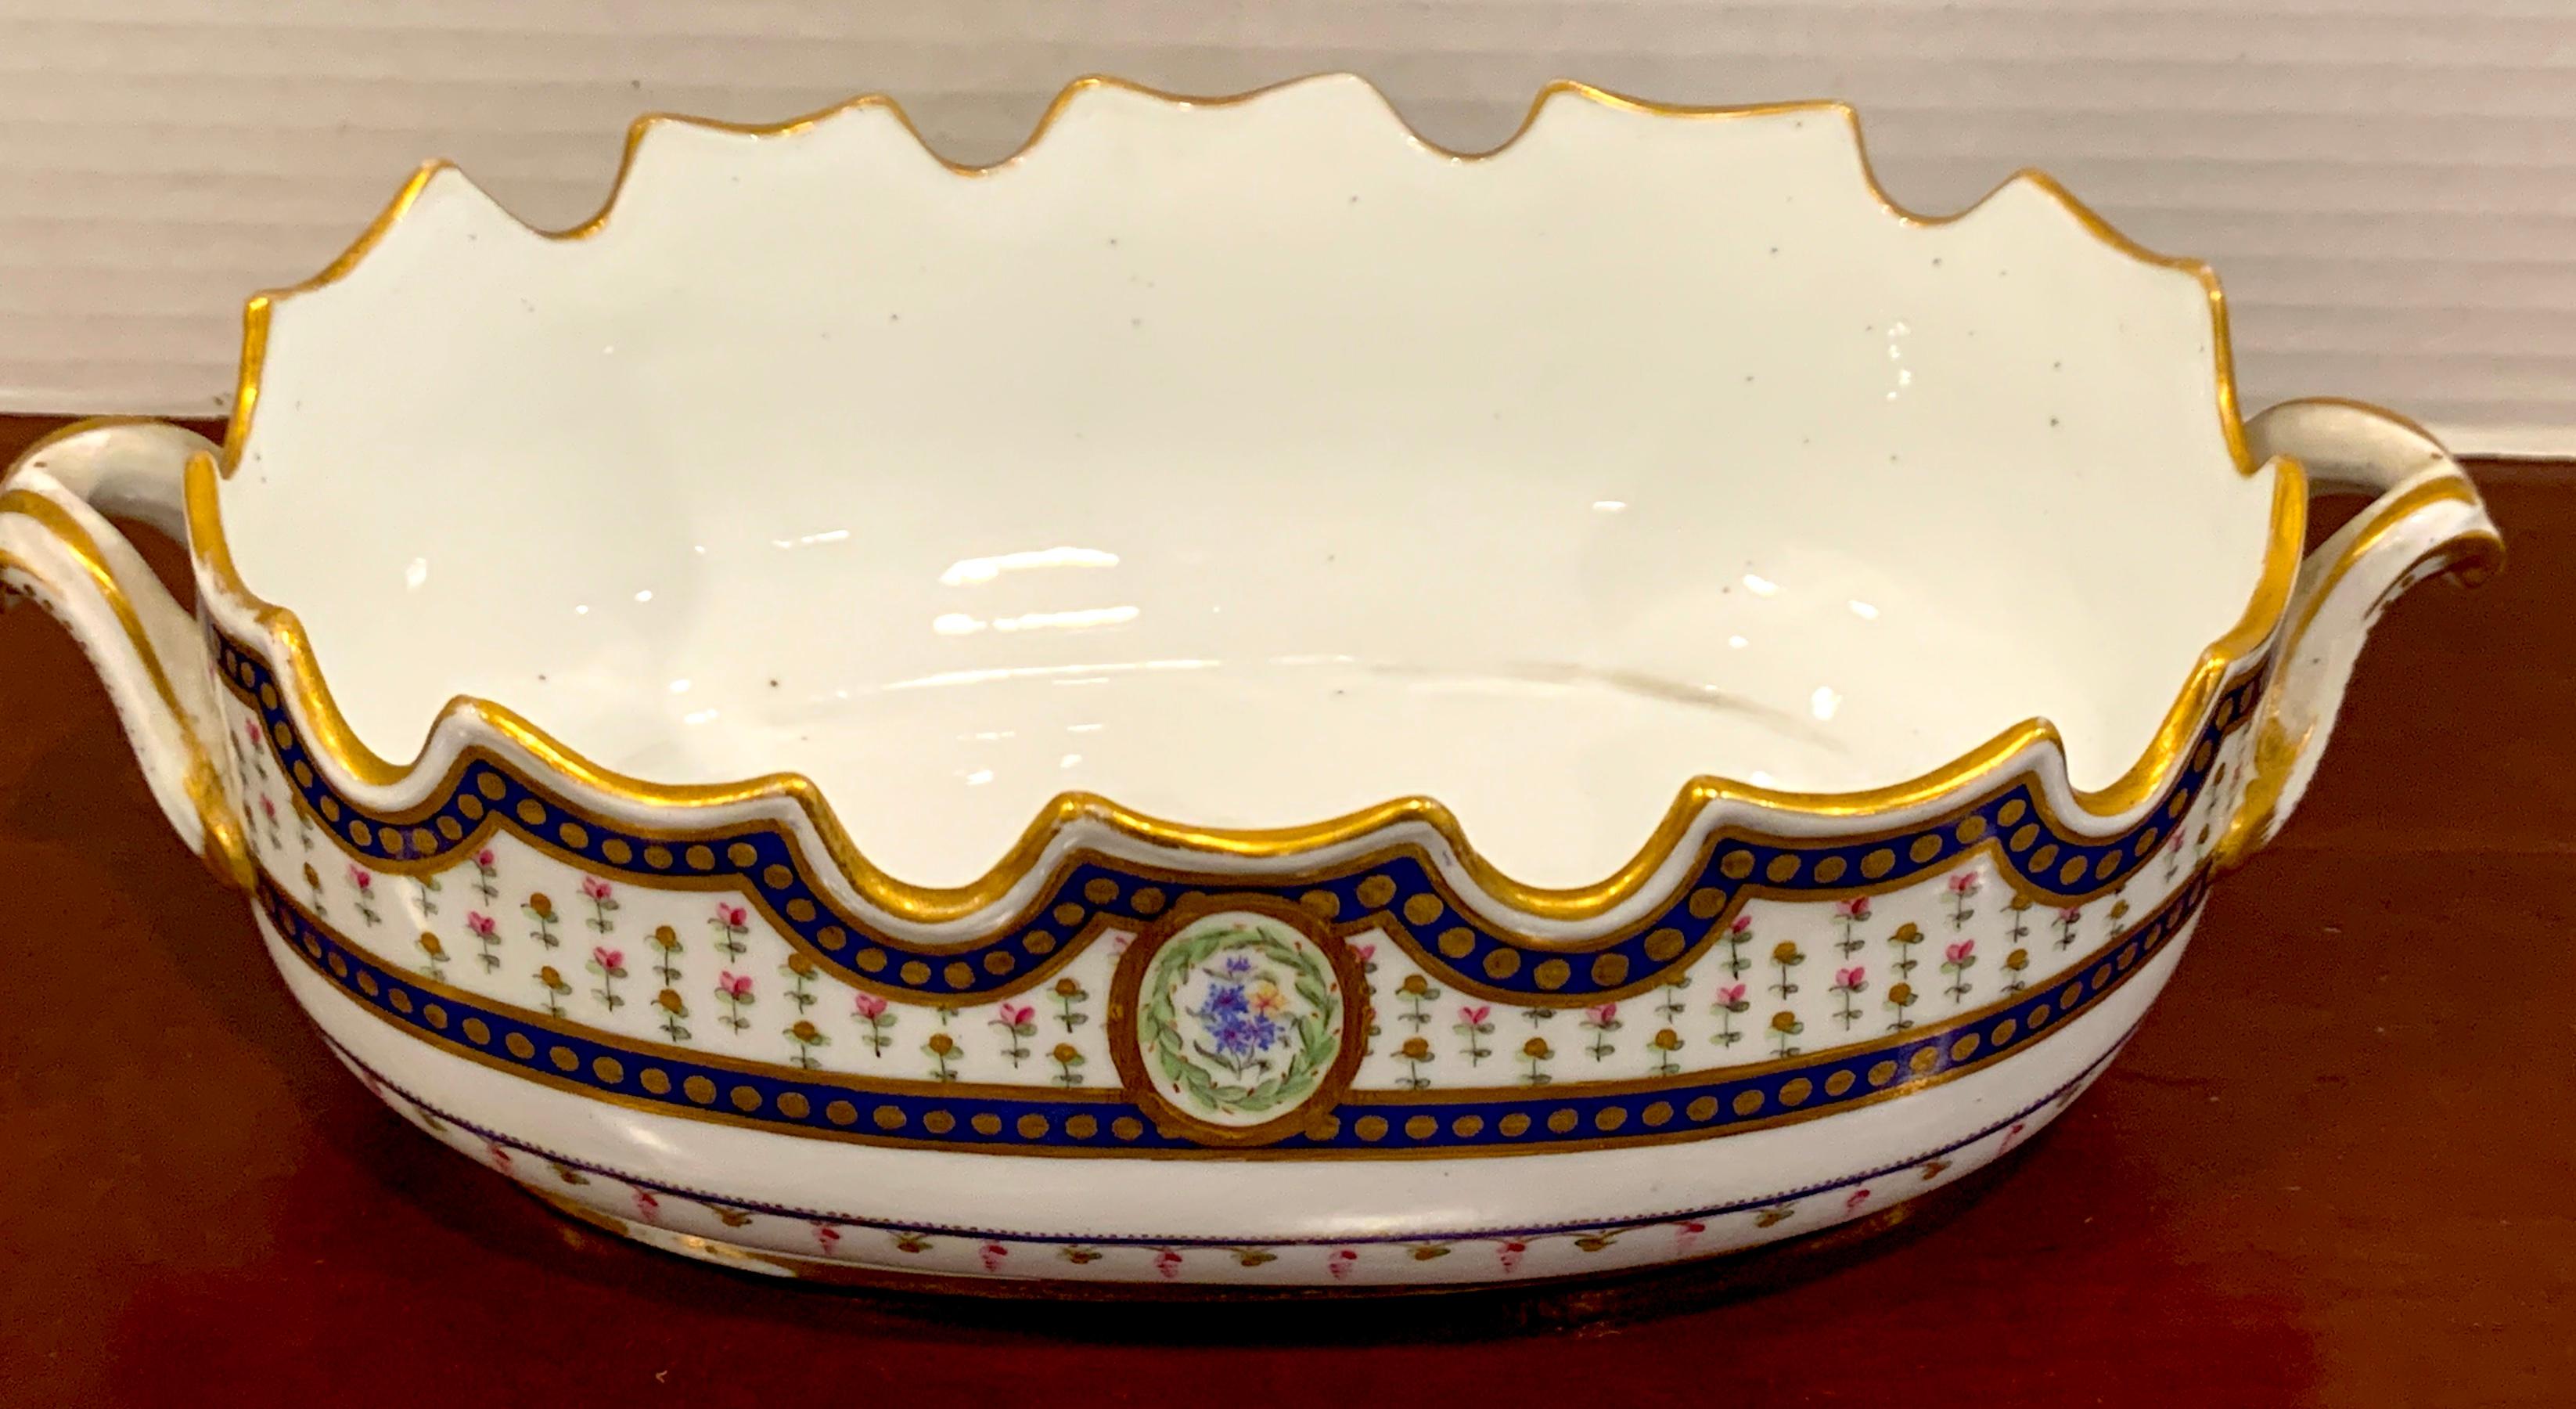 18th century Sevres Porcelain floral painted Monteith bowl, 1793, of typical form with twin handles and scalloped rim, painted with two different front and back floral vignettes. The interior measures 9